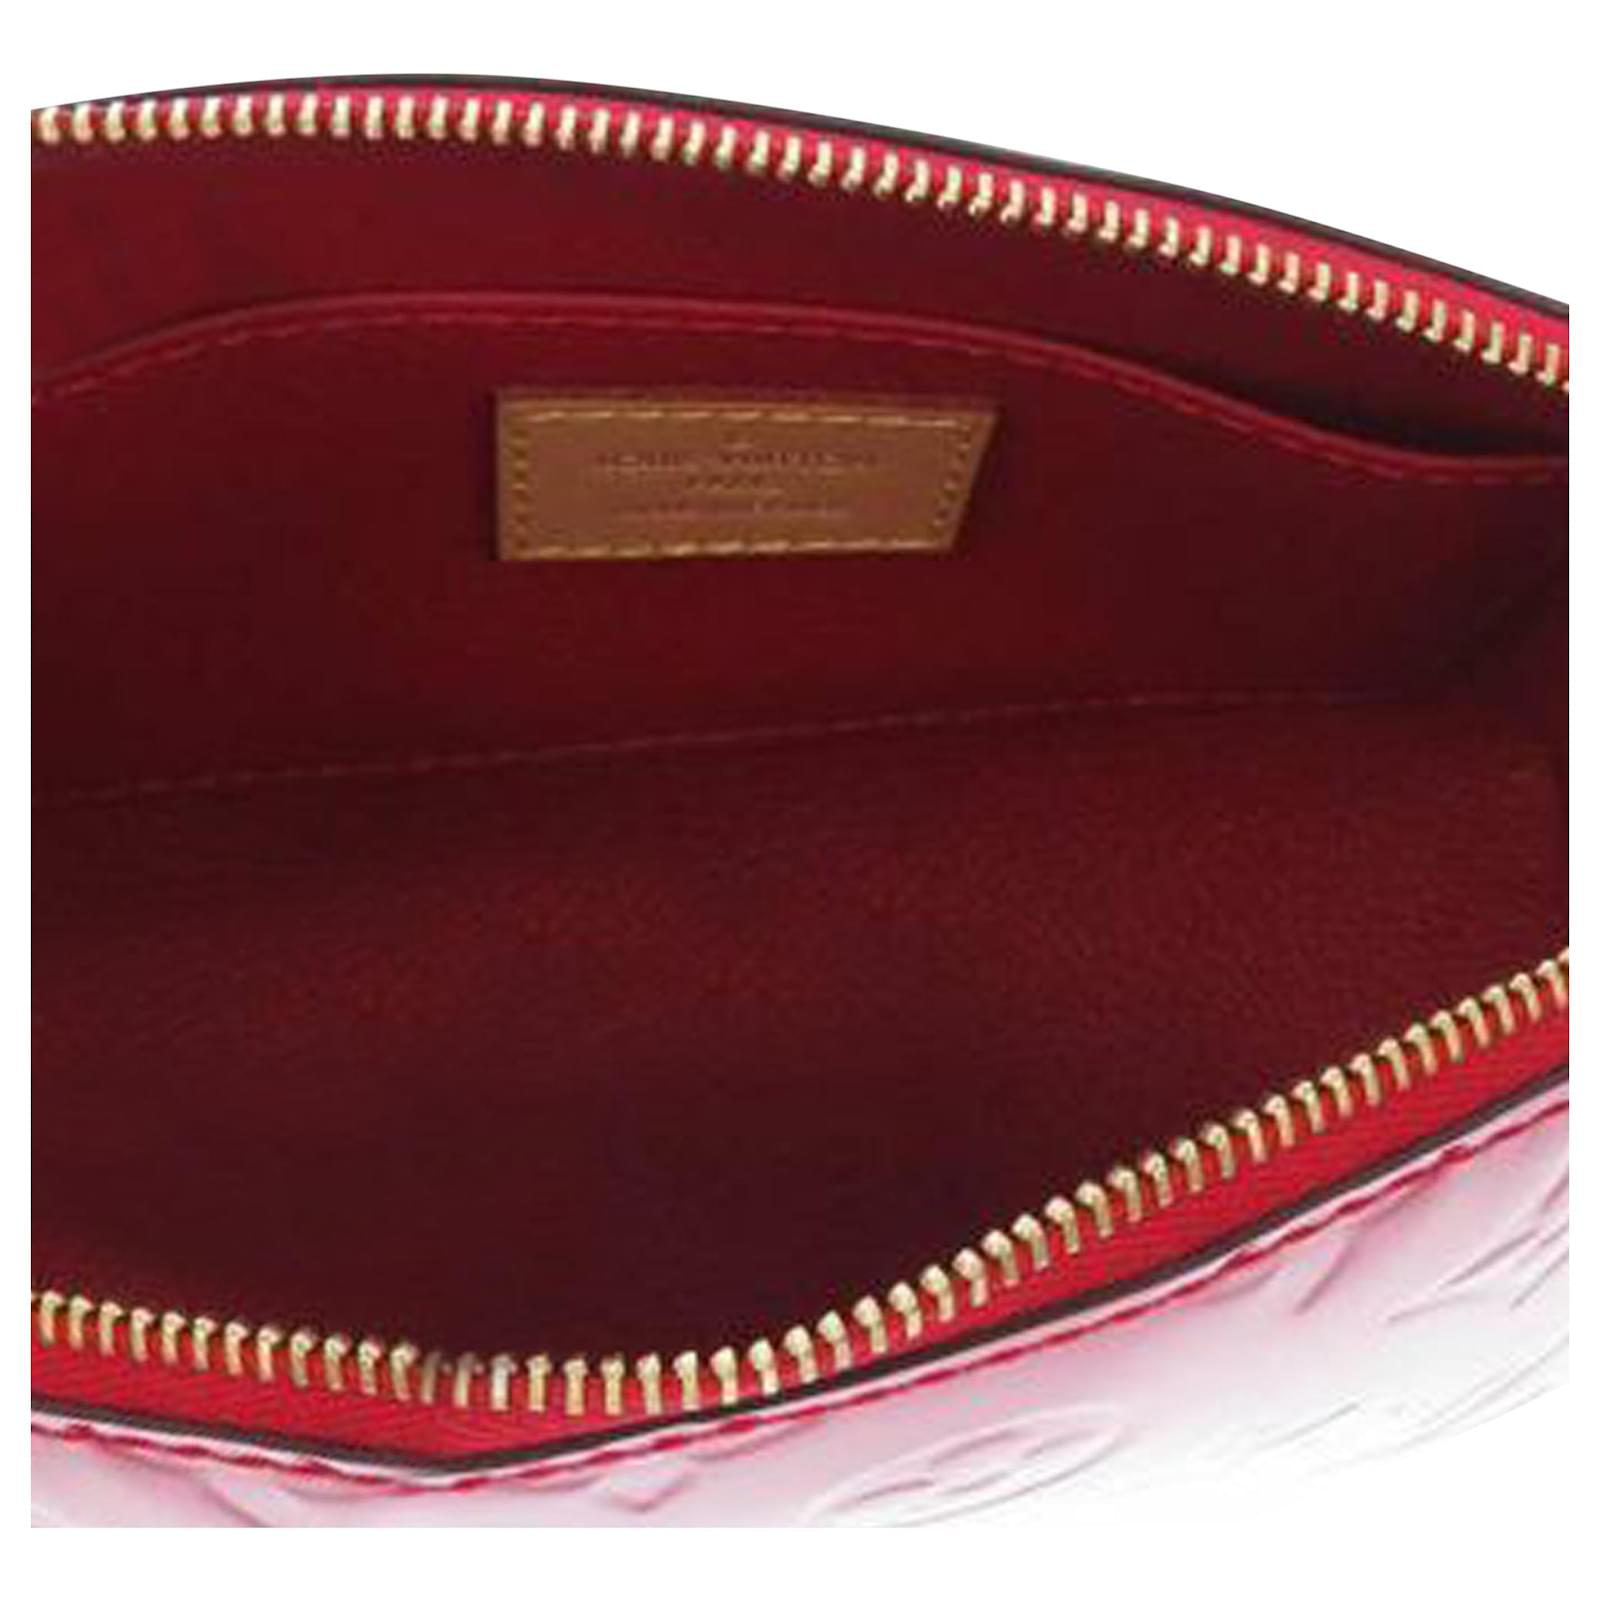 Louis Vuitton Trousse Cosmetic Pouch Monogram Vernis Red 563423